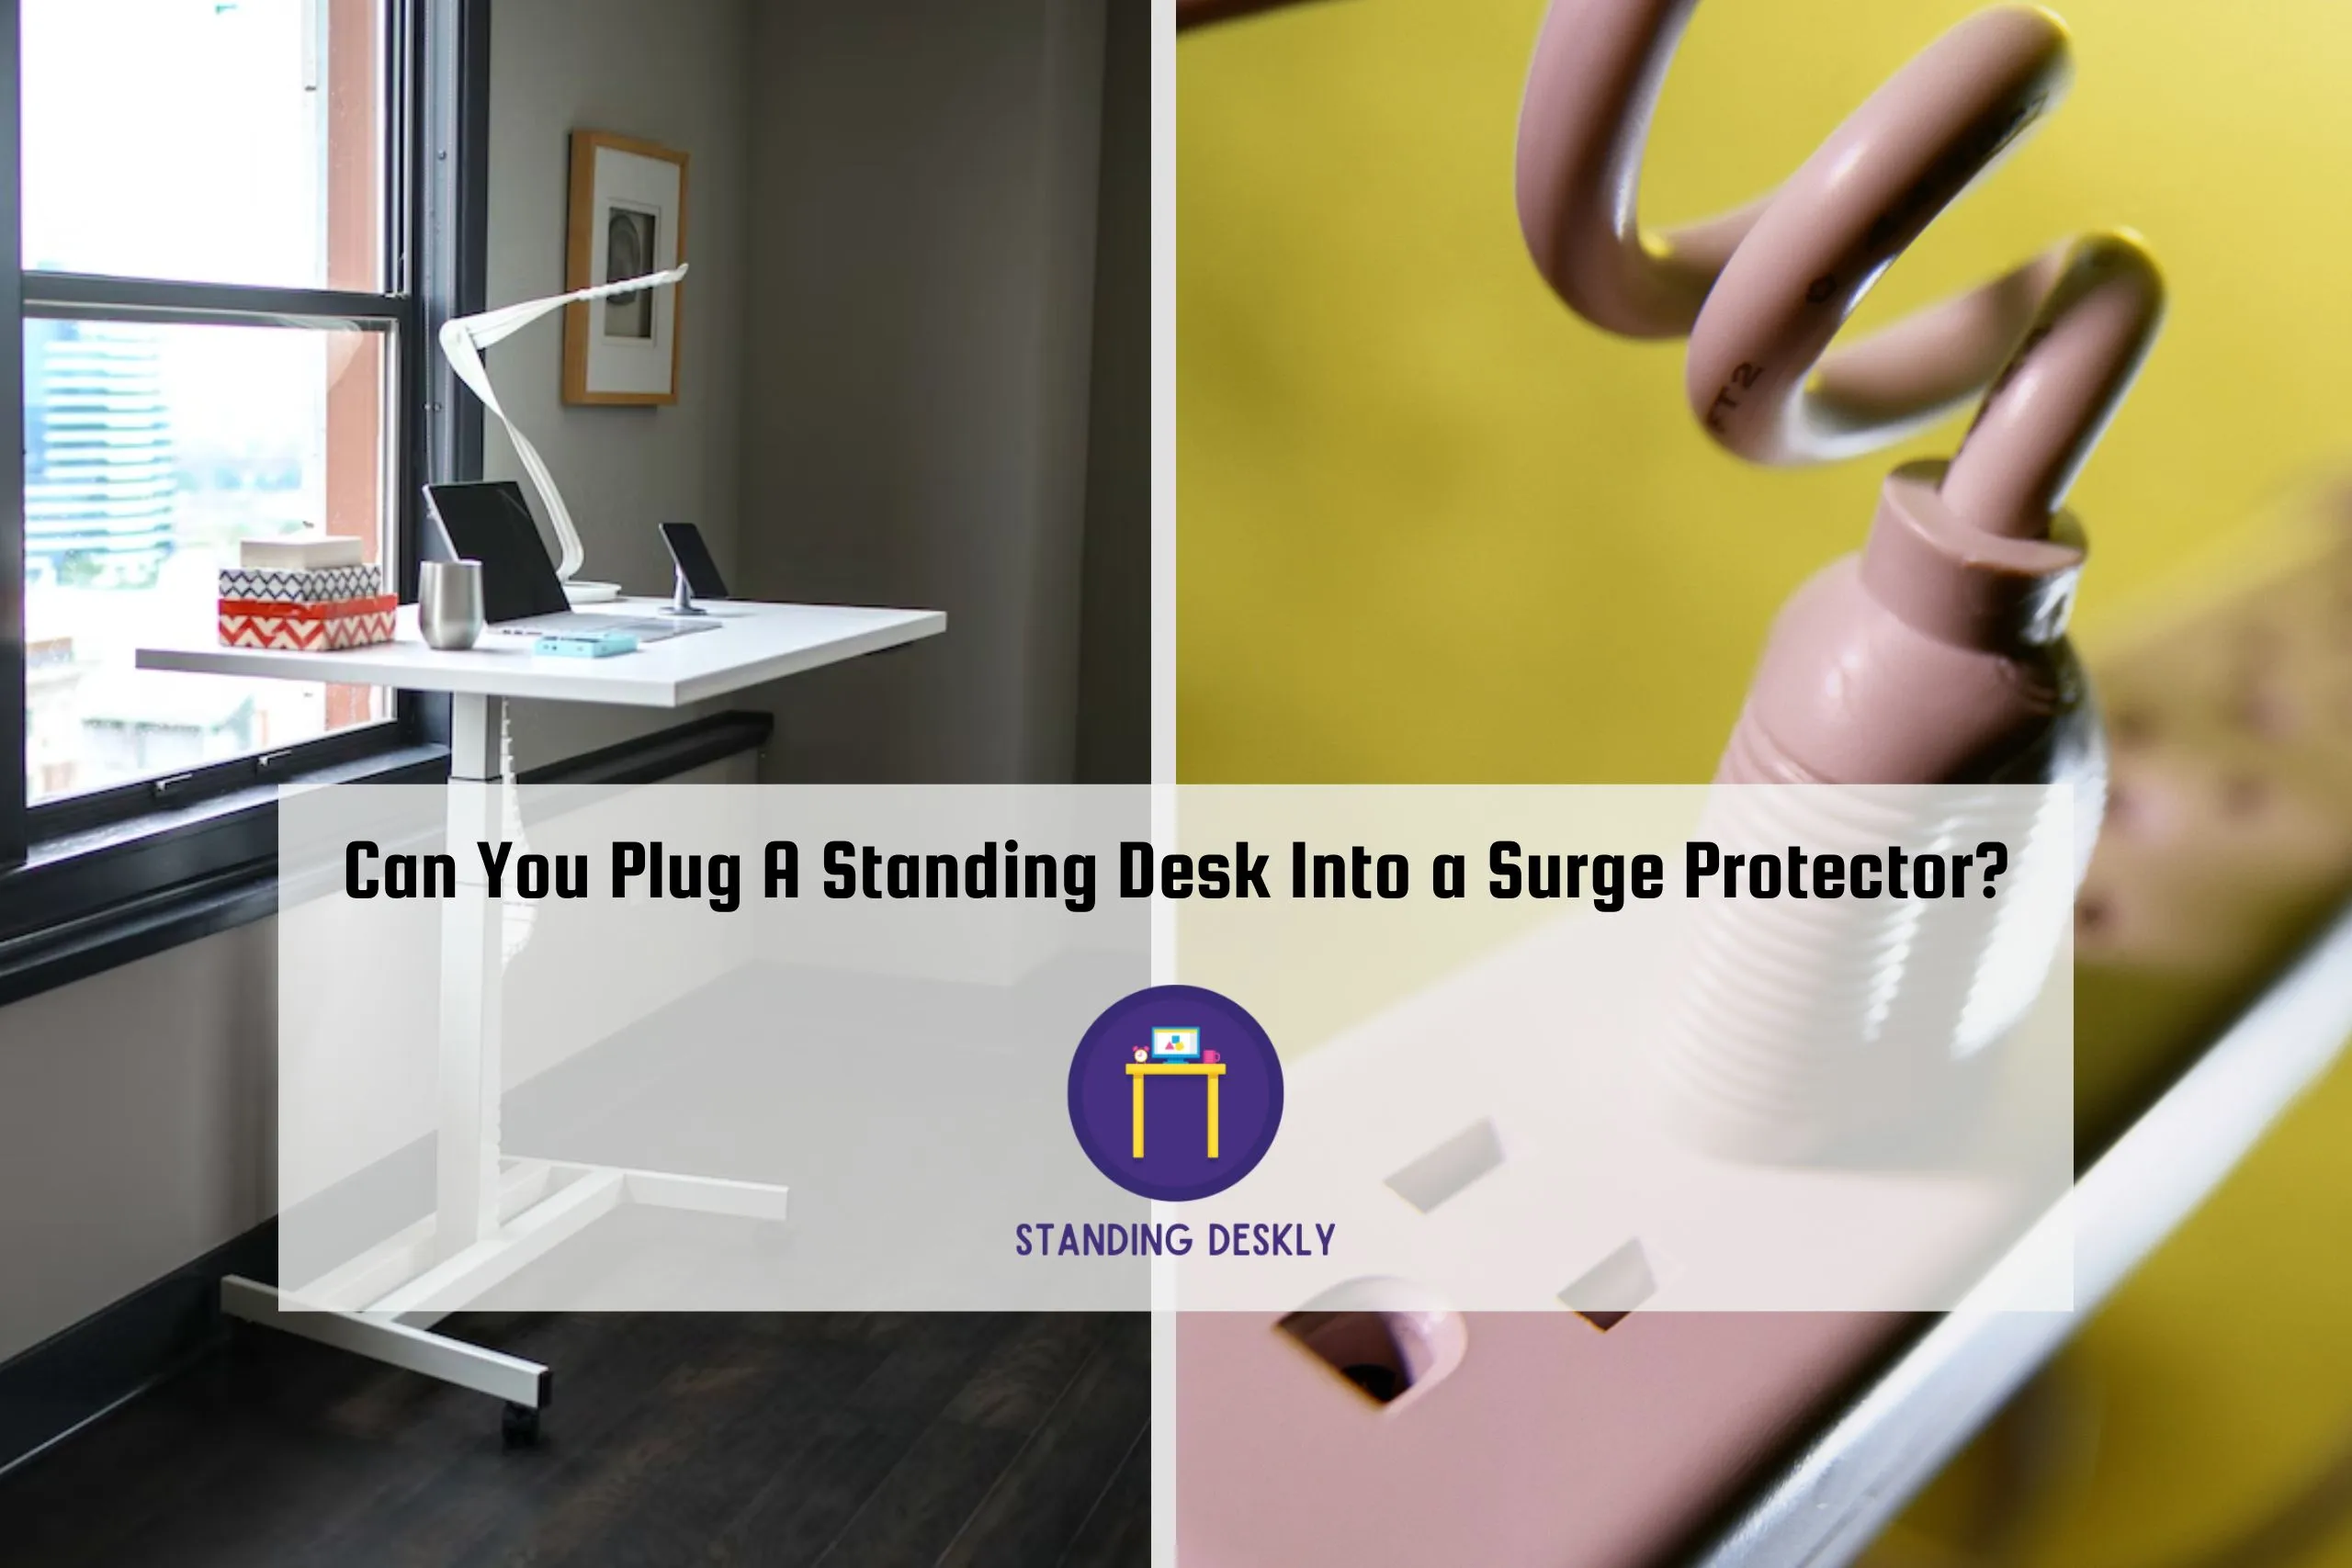 Can You Plug A Standing Desk Into a Surge Protector